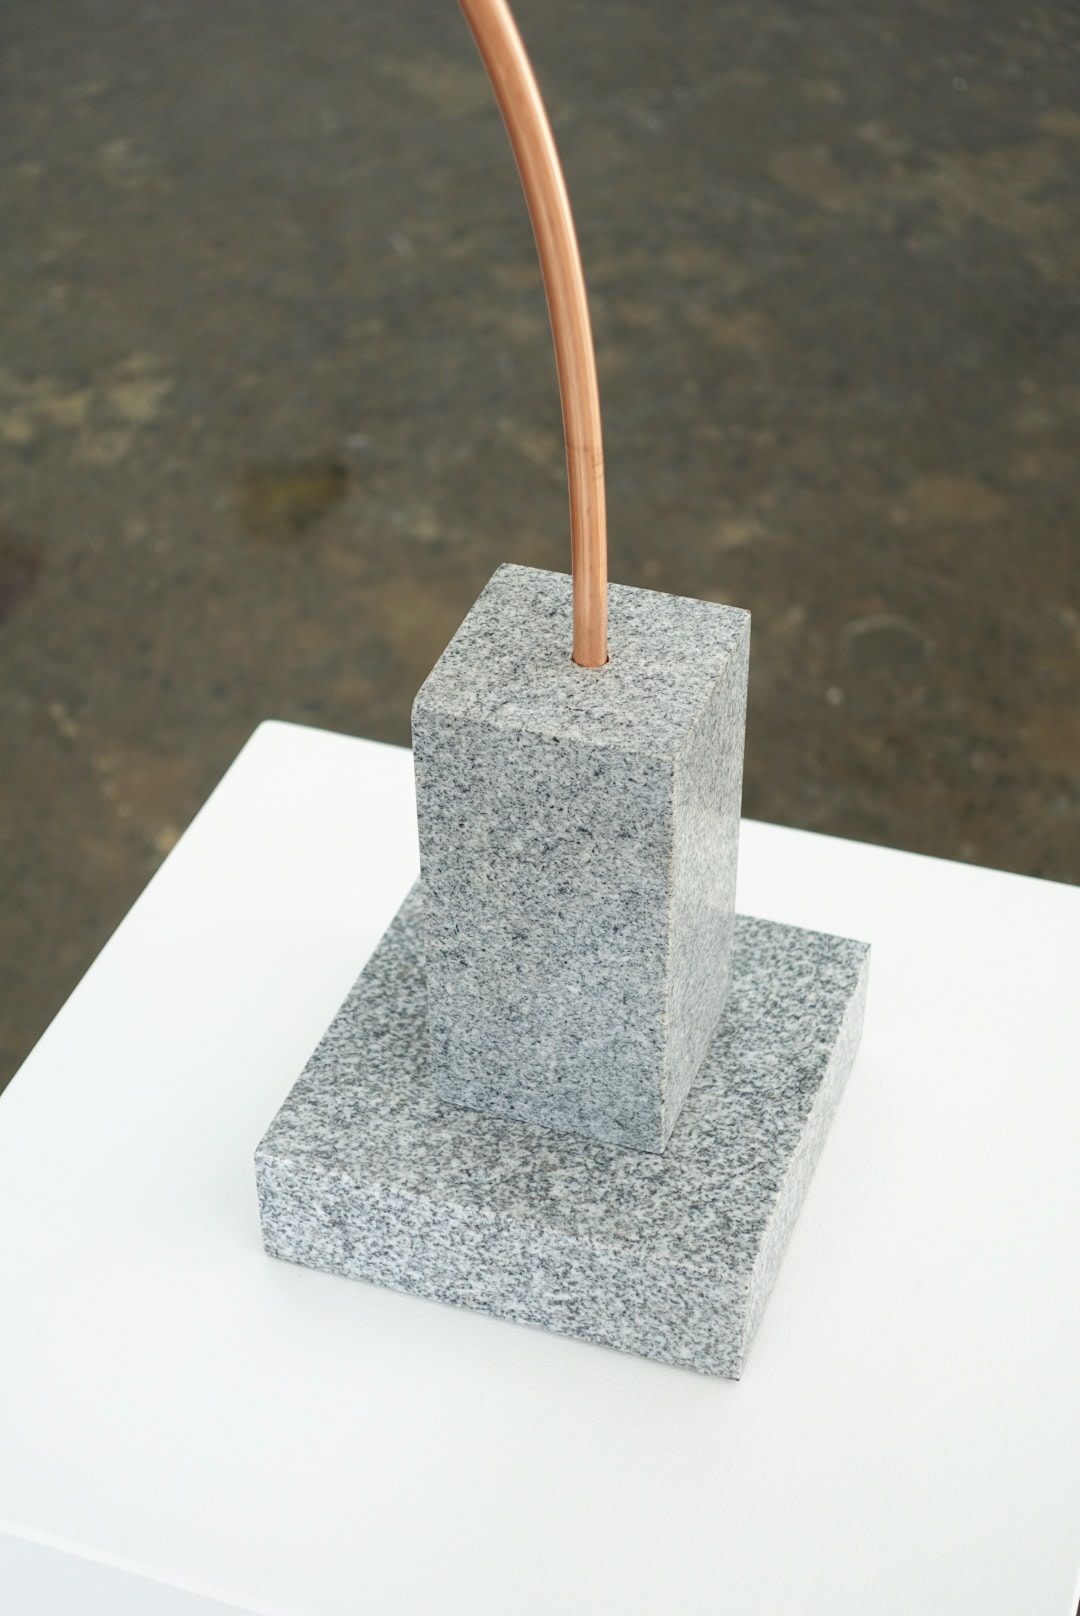 MICHAEL VICKERS | OLIVE BRANCH&nbsp;| PAINTED COPPER AND GRANITE | 34&nbsp;X 6&nbsp;X 12&nbsp;INCHES&nbsp;| 2017